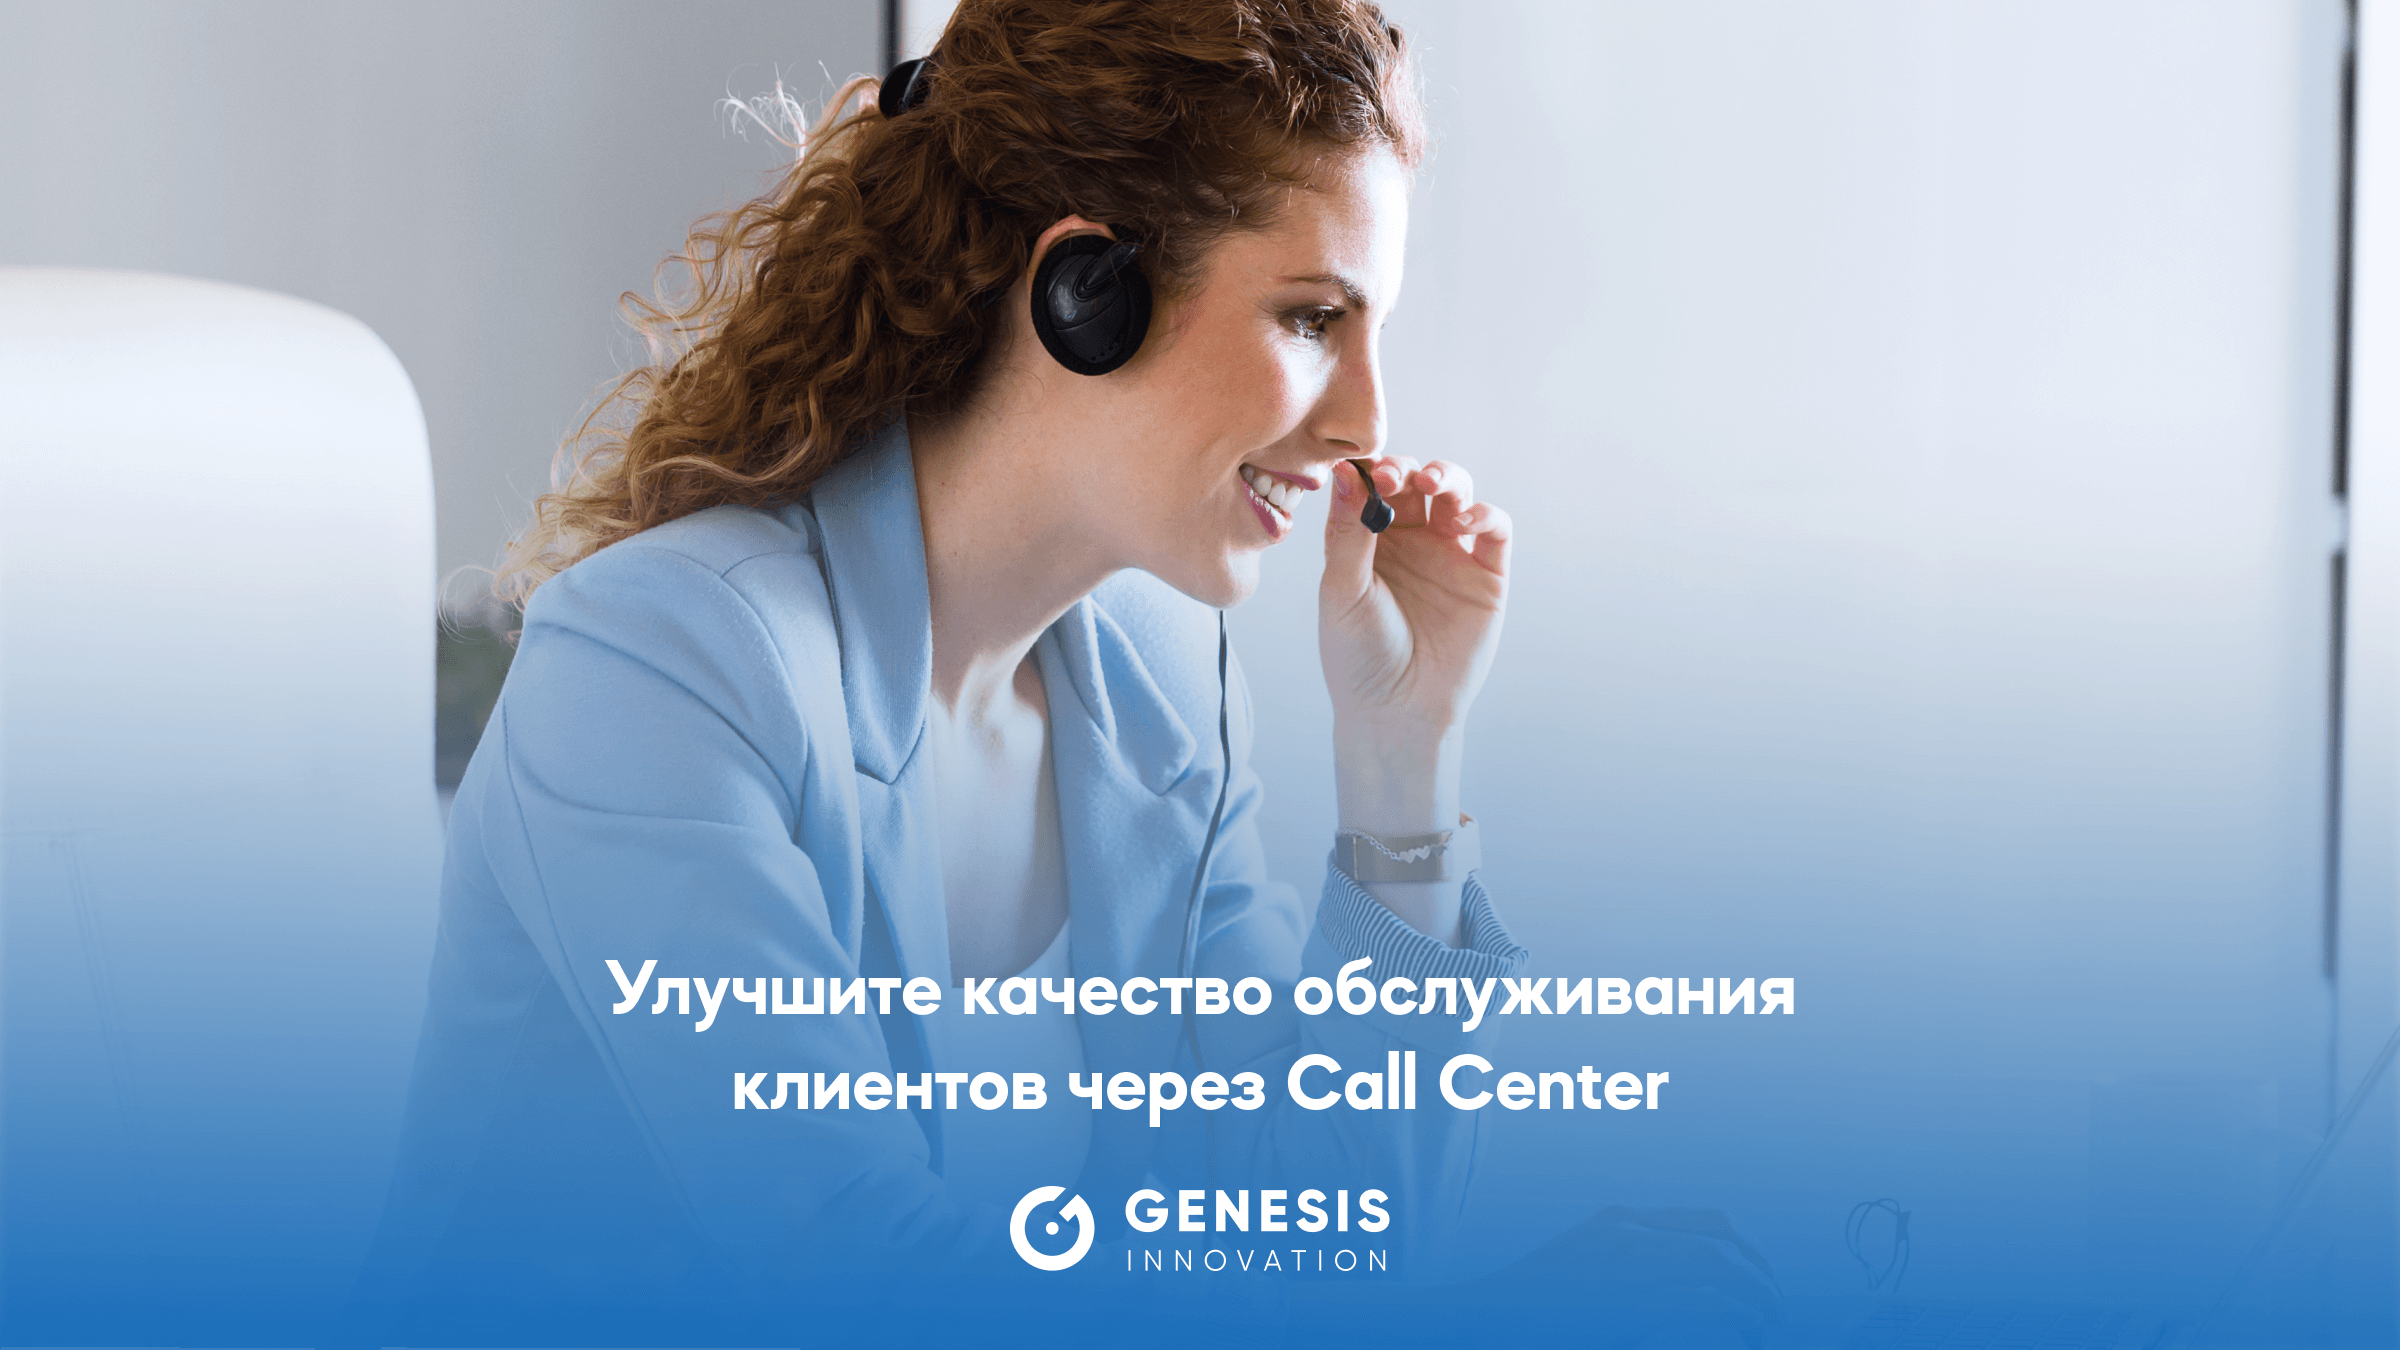 Improve the quality of customer service through the Call Center.